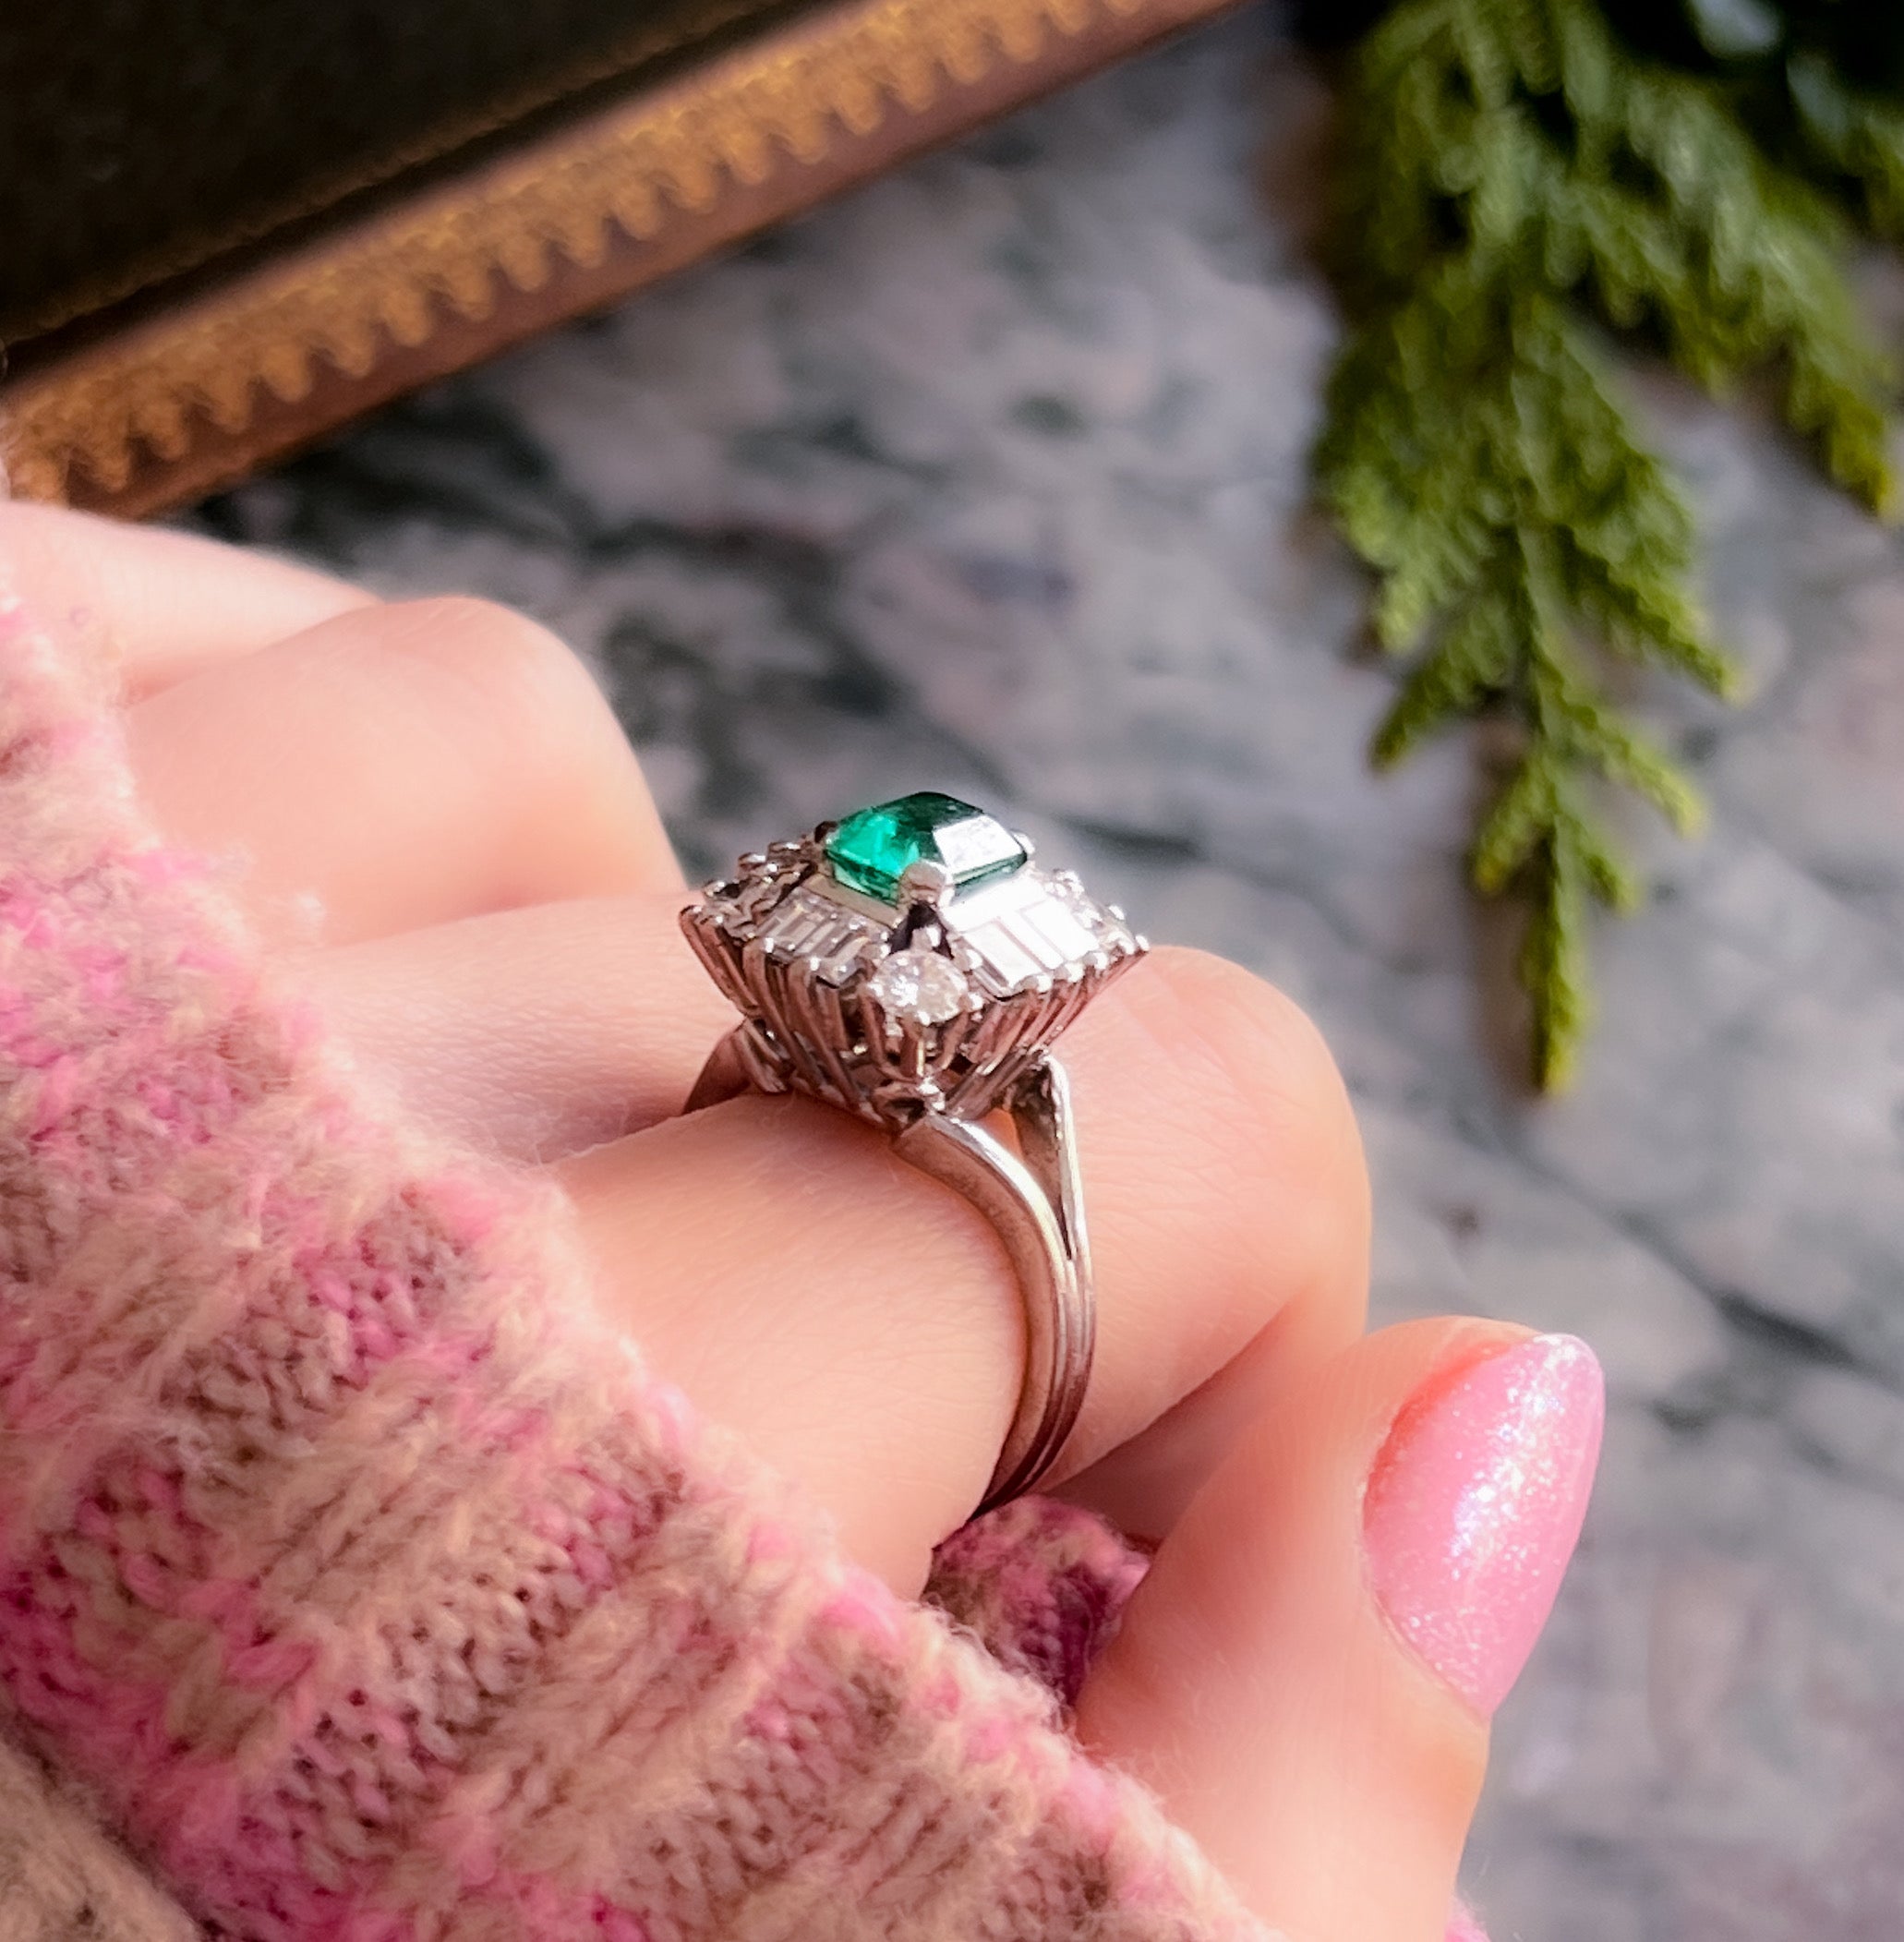 Outstanding Emerald Cocktail Ring Circa 1970